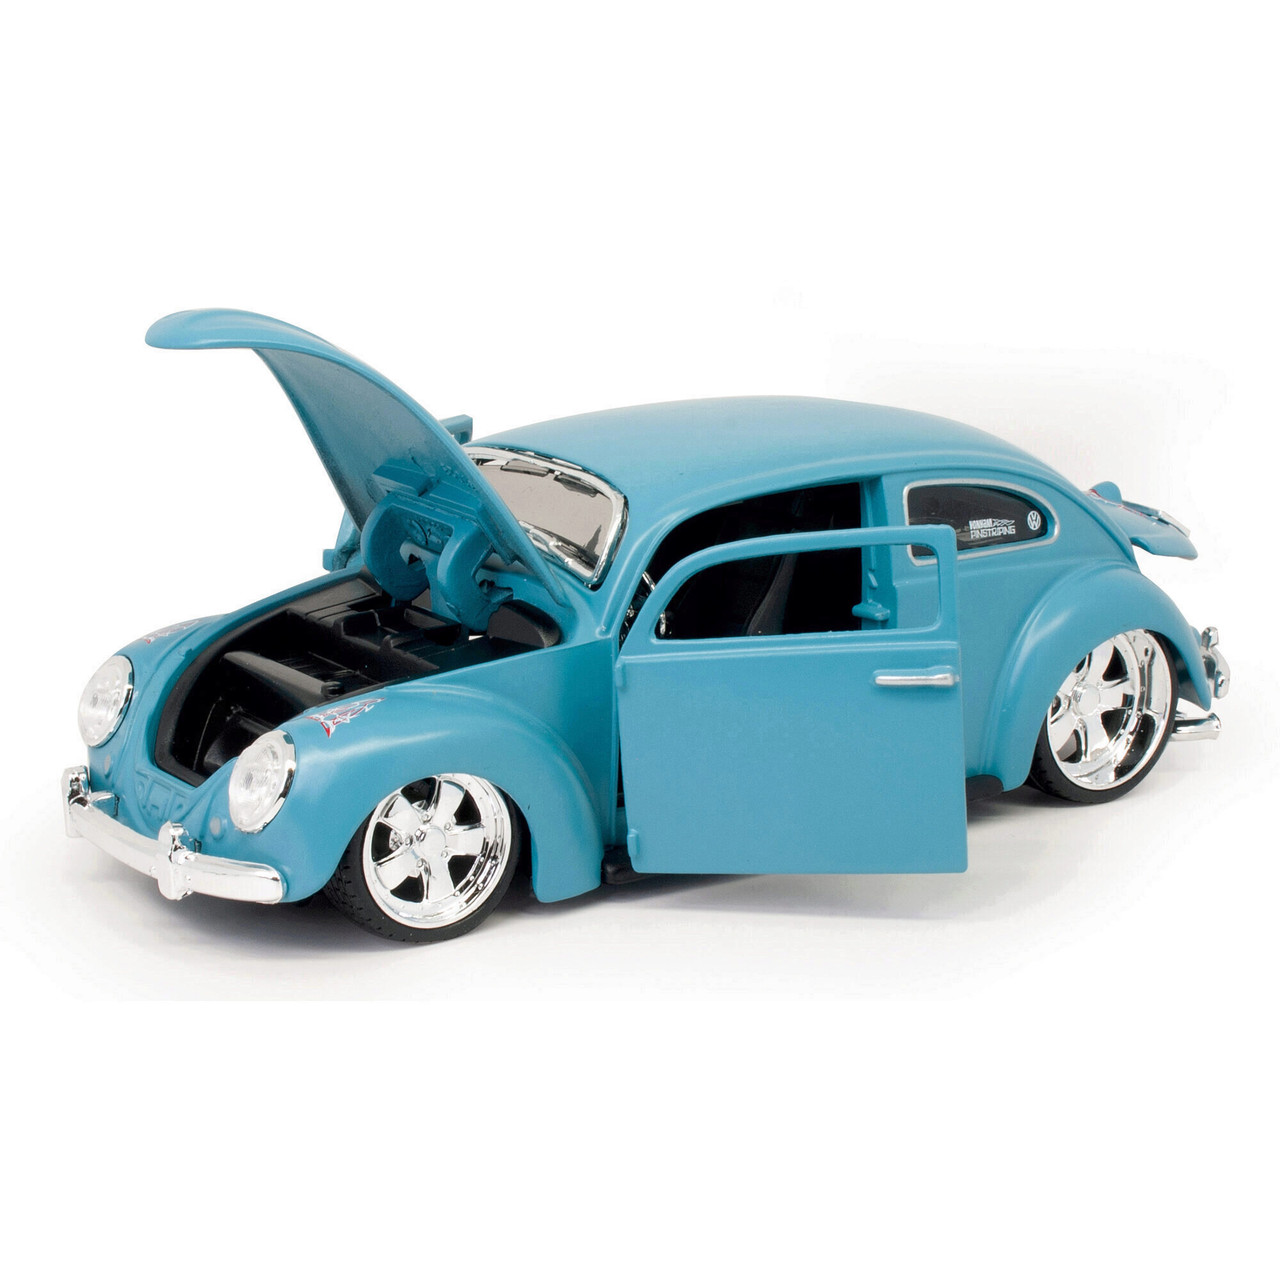 Design Outlaws VW Beetle 1:24 Scale Diecast Model by | Fairfield Collectibles - The #1 Source For High Quality Diecast Scale Model Cars